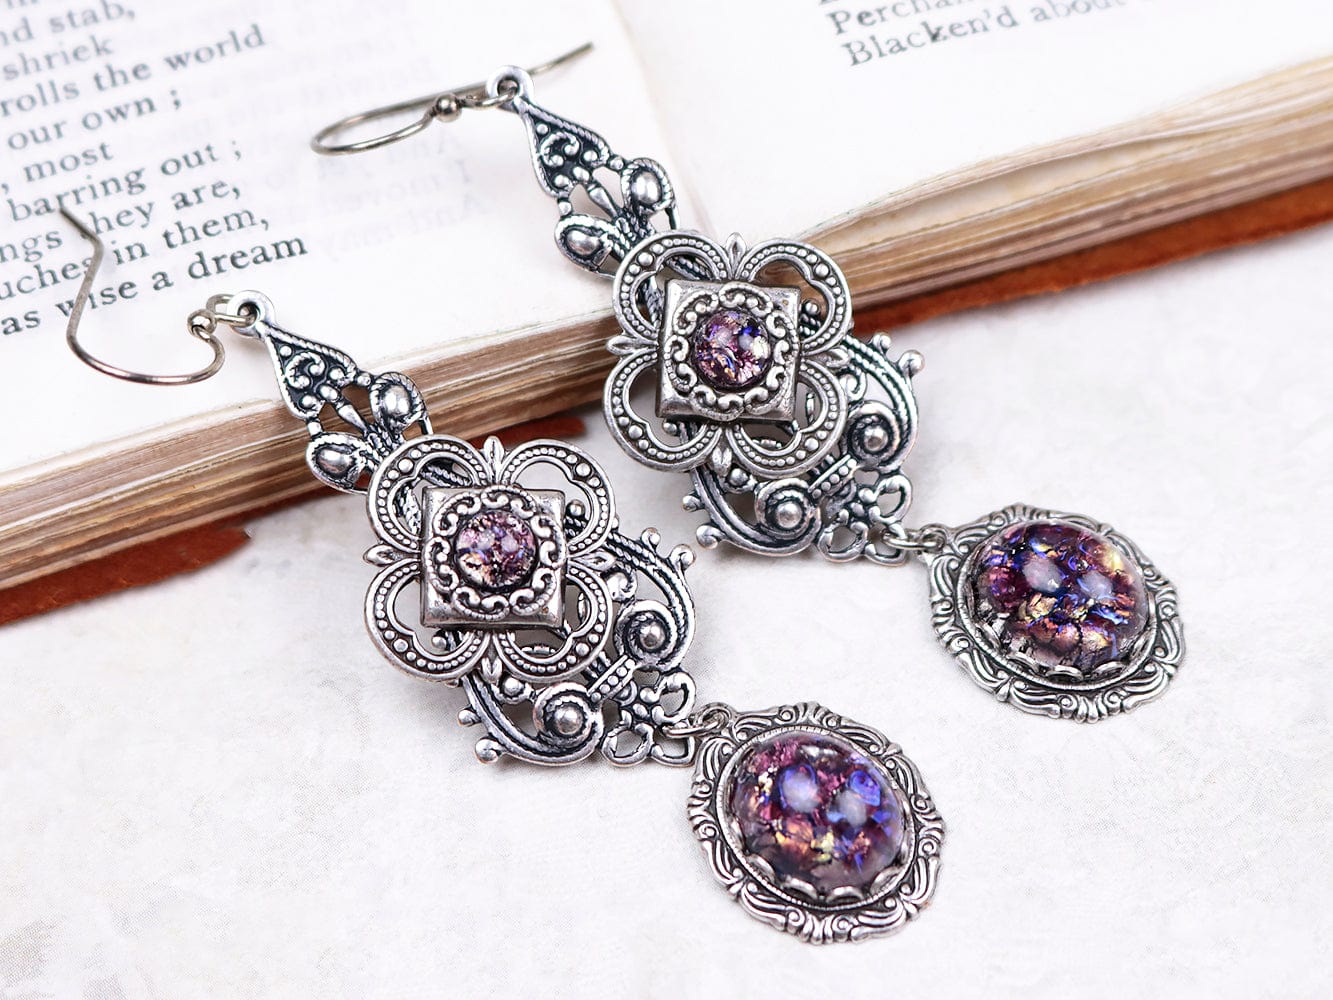 Avalon Earrings in Amethyst Opal and Antiqued Silver by Rabbitwood & Reason